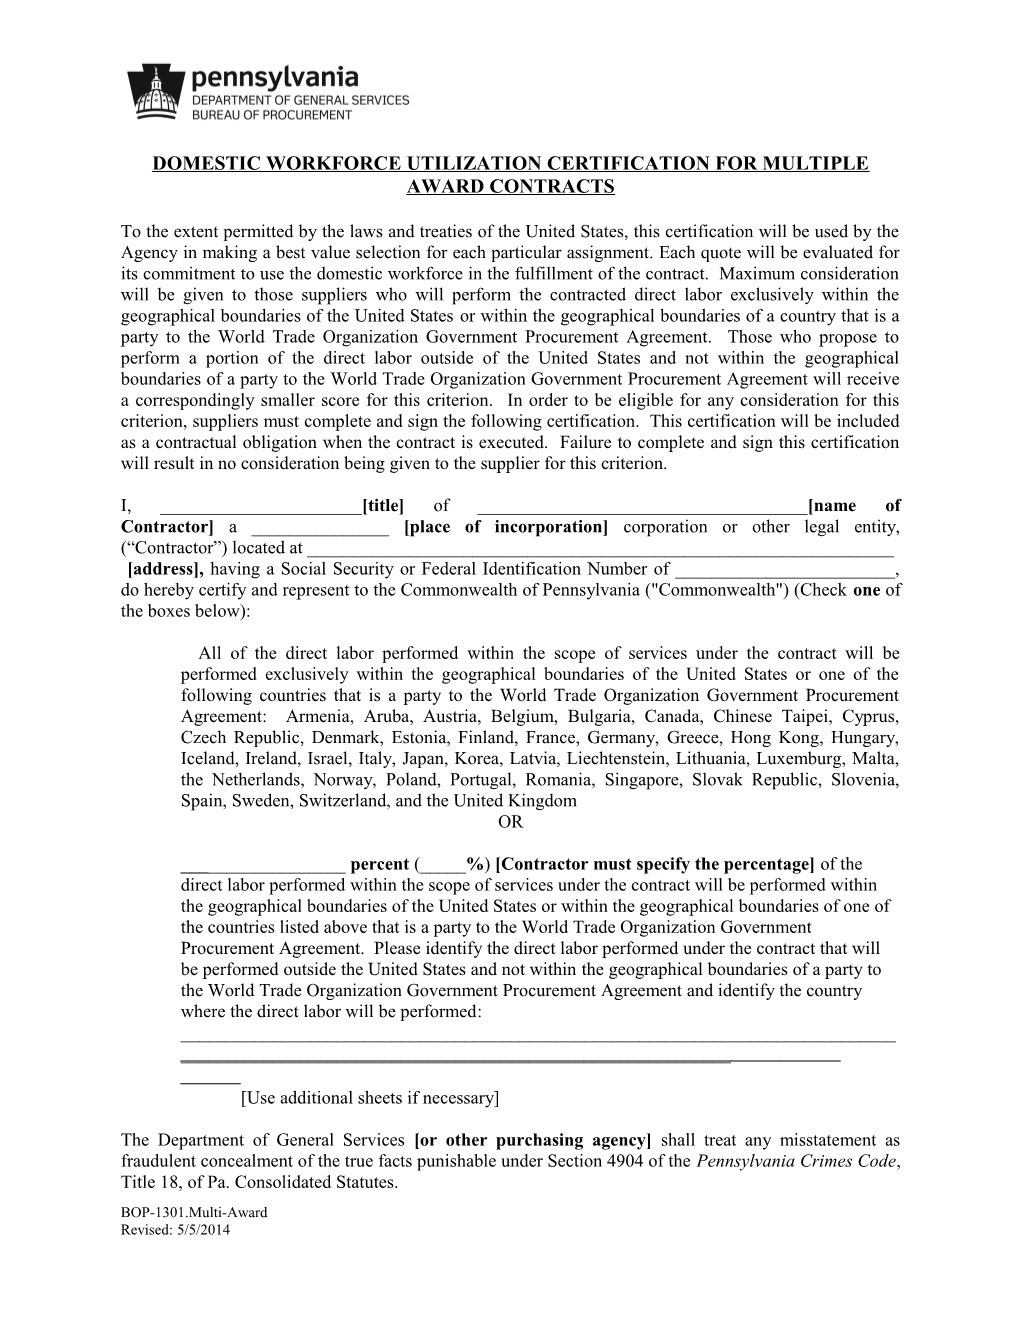 Domestic Workforce Utilization Certification for Multiple Award Contracts